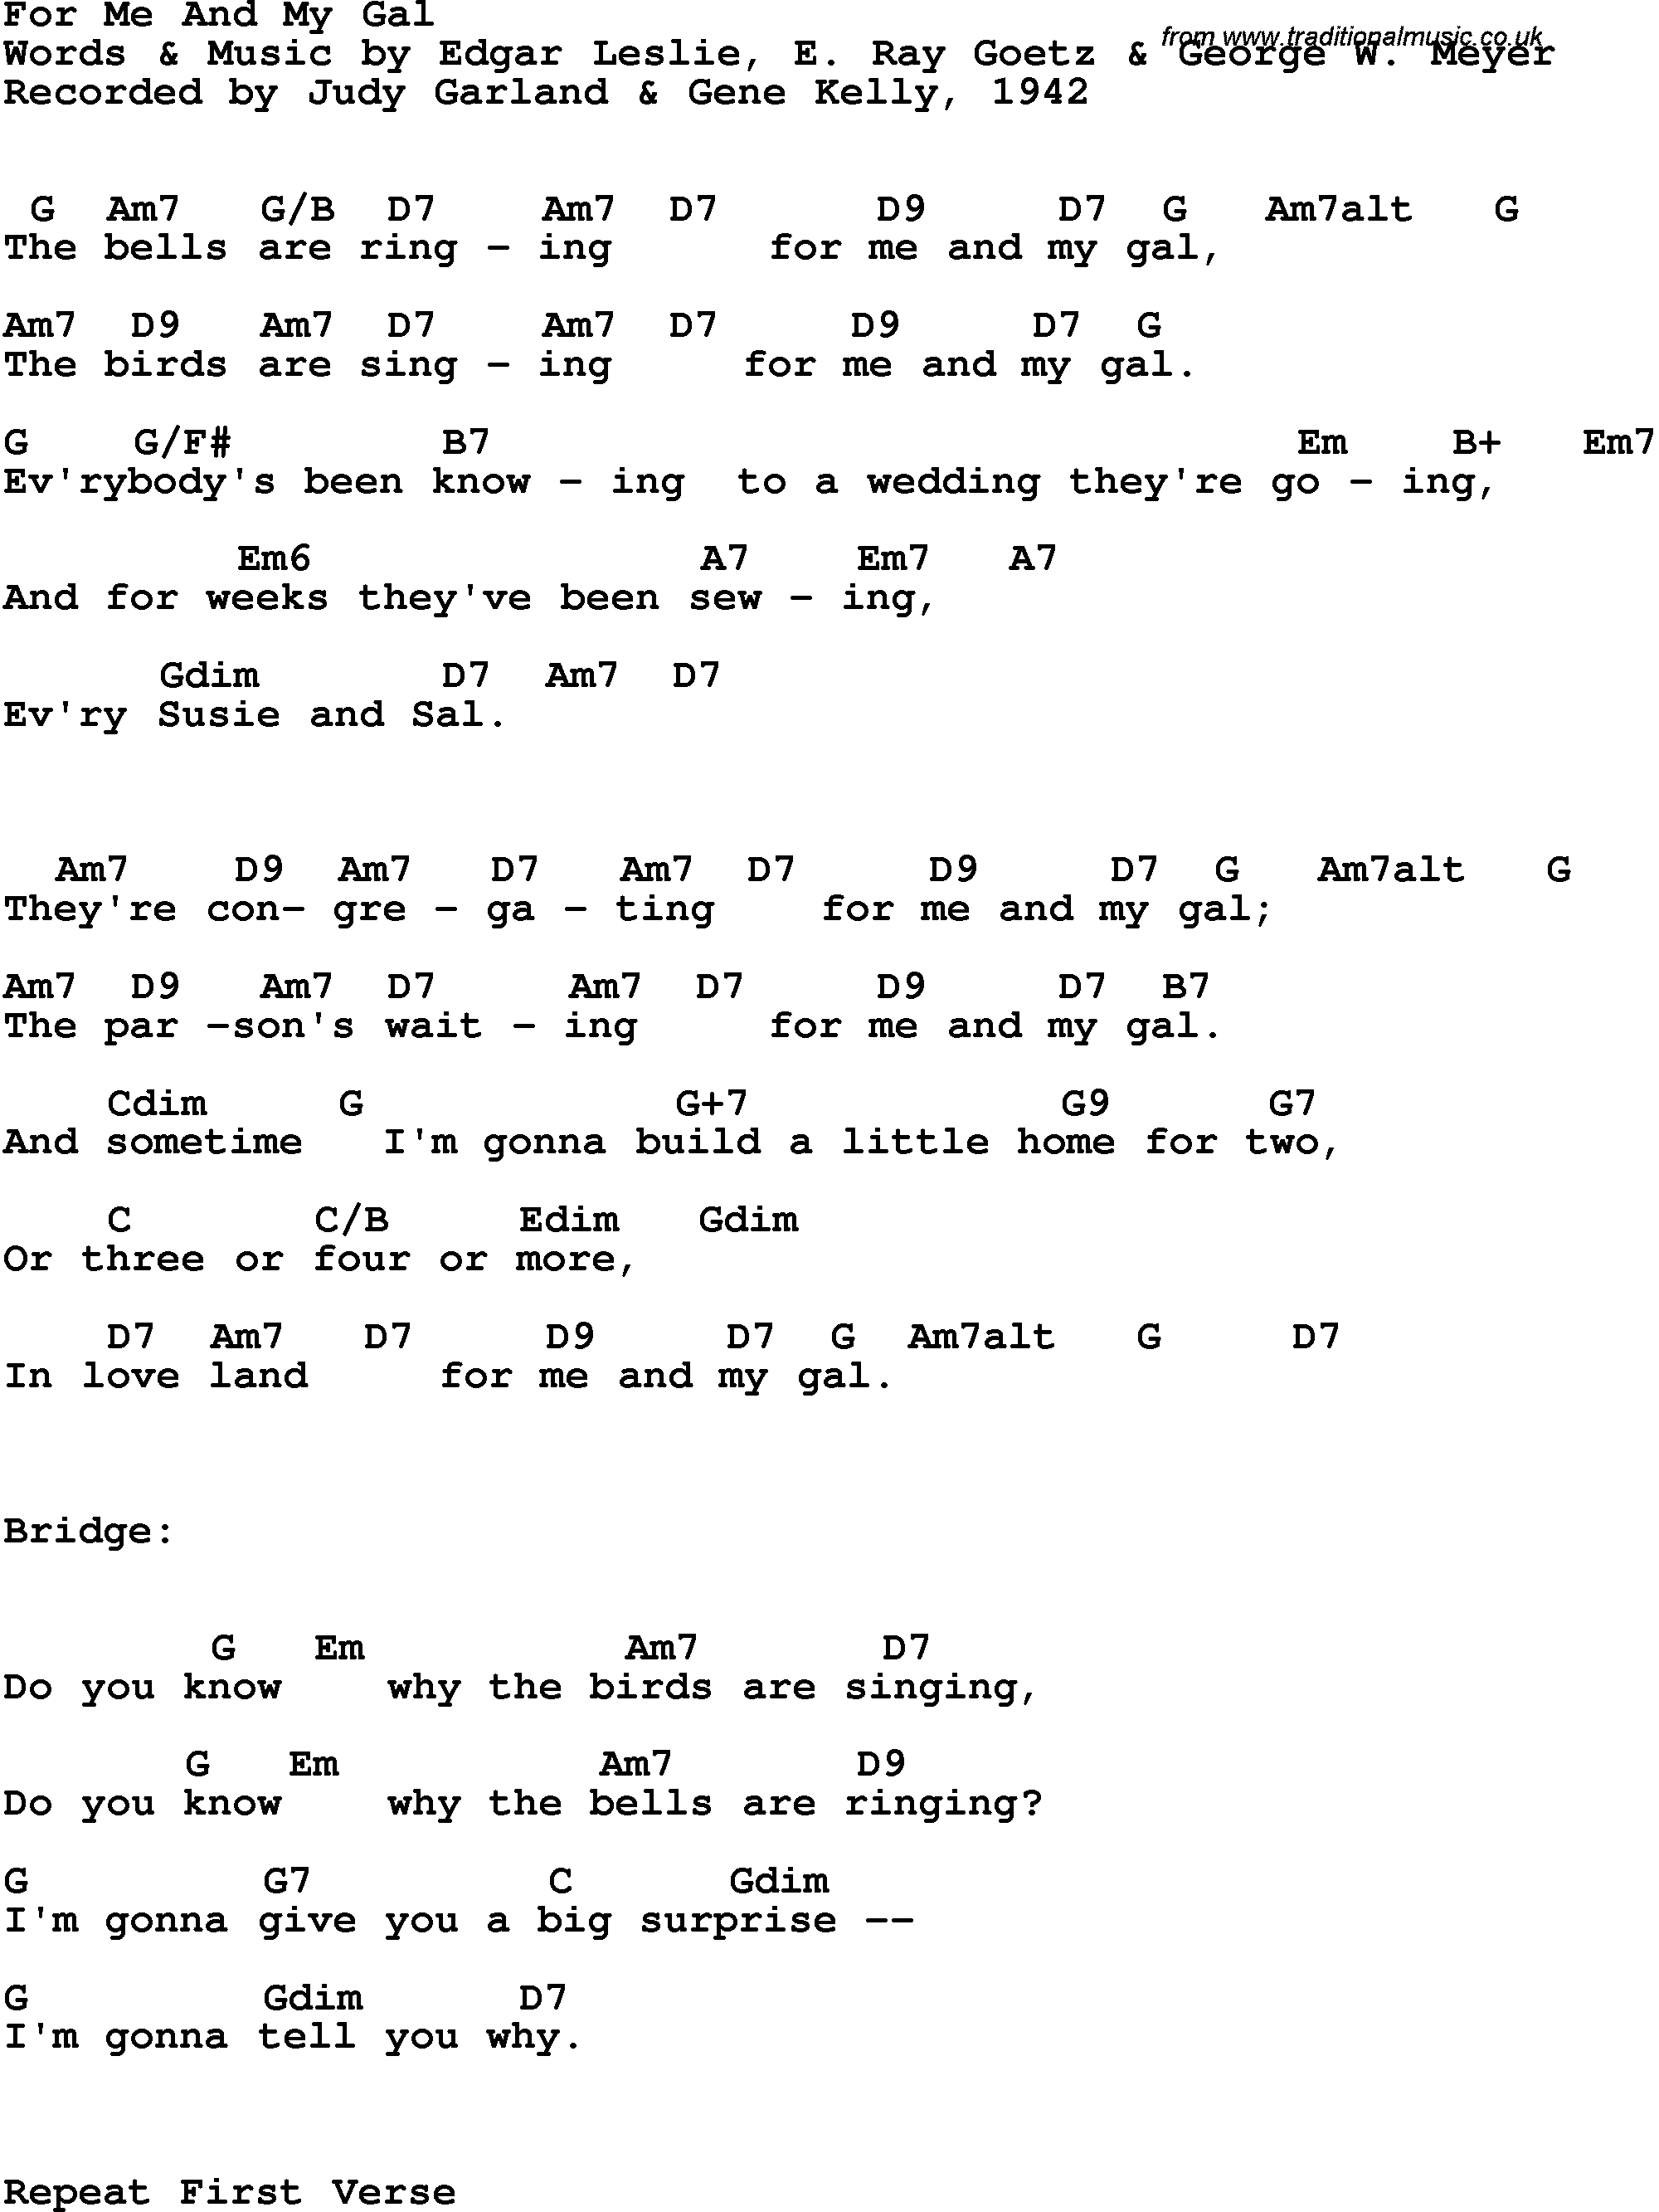 Song Lyrics with guitar chords for For Me And My Gal - Judy Garland & Gene Kelly, 1942